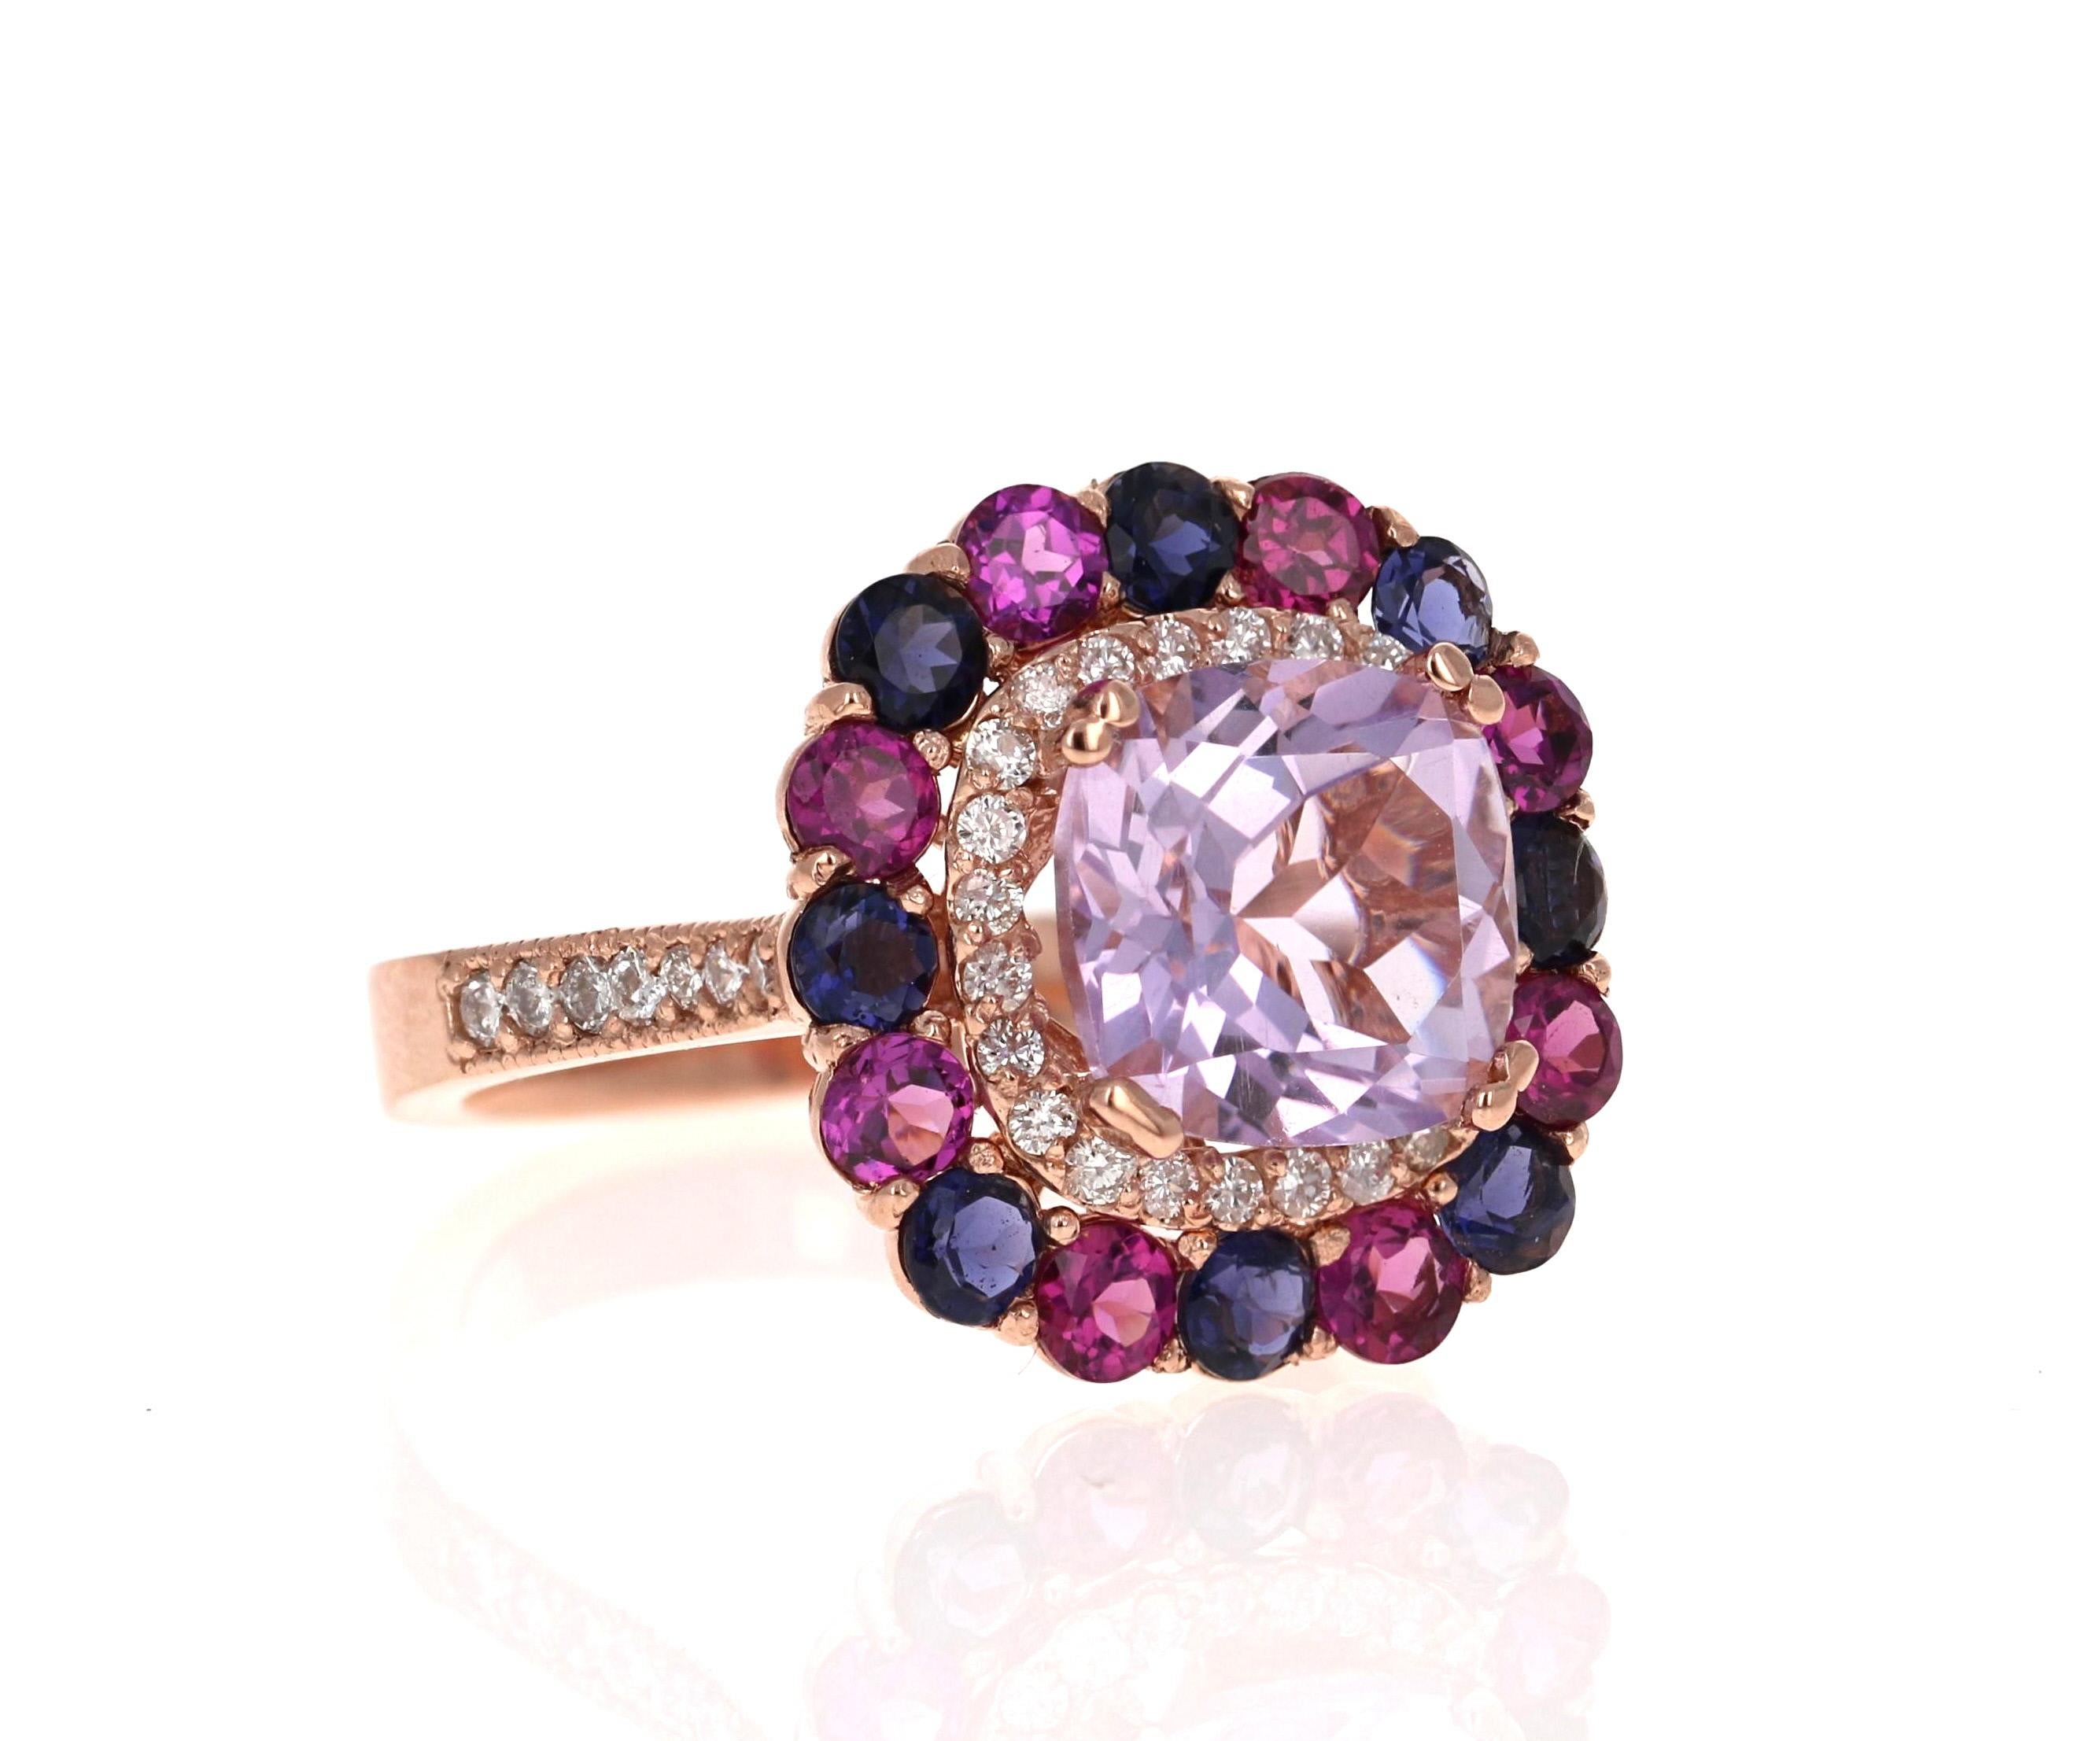 Amethyst, Purple Garnet and Diamond Cocktail Ring!   A beautiful and sparkly combination of Purple beauty!

This one of a kind piece has been carefully designed and curated by our in house designer!

This ring has a light purple Cushion Cut Amethyst